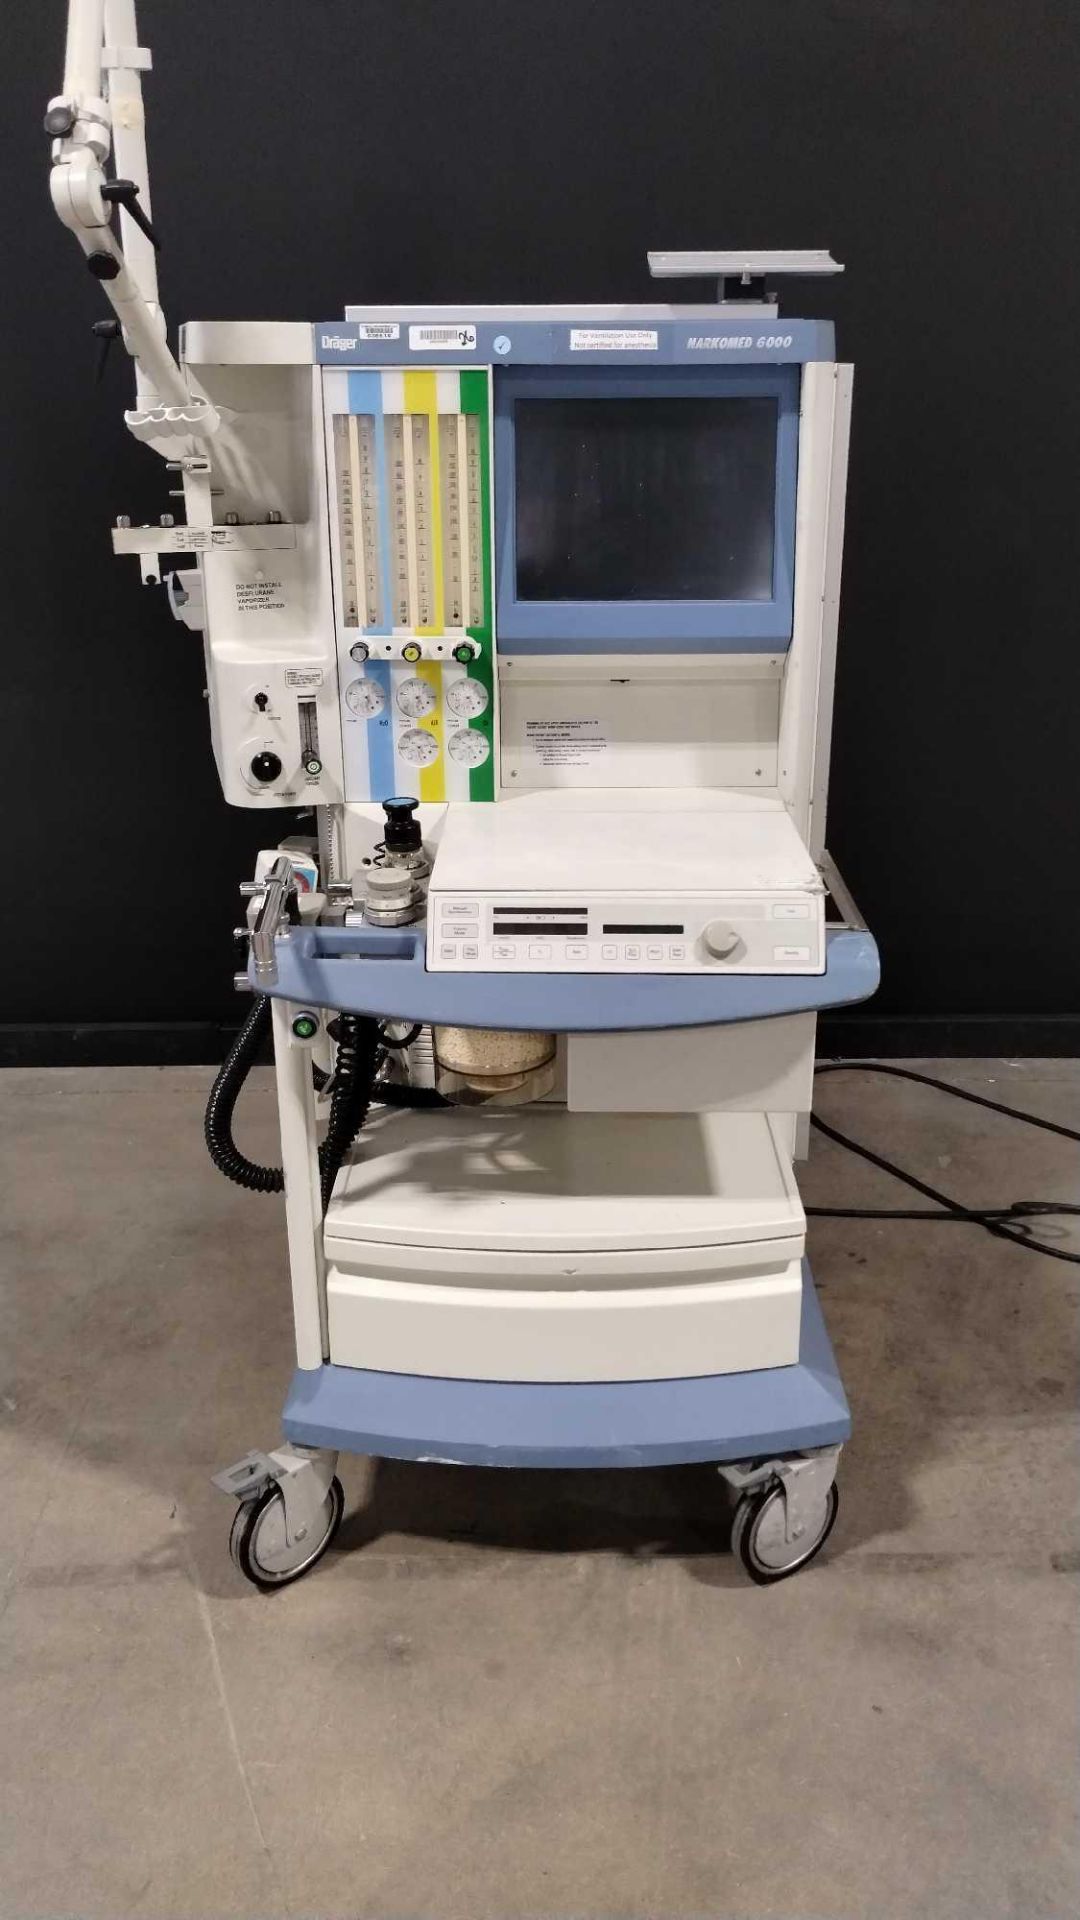 DRAGER NARKOMED 6000 ANESTHESIA MACHINE